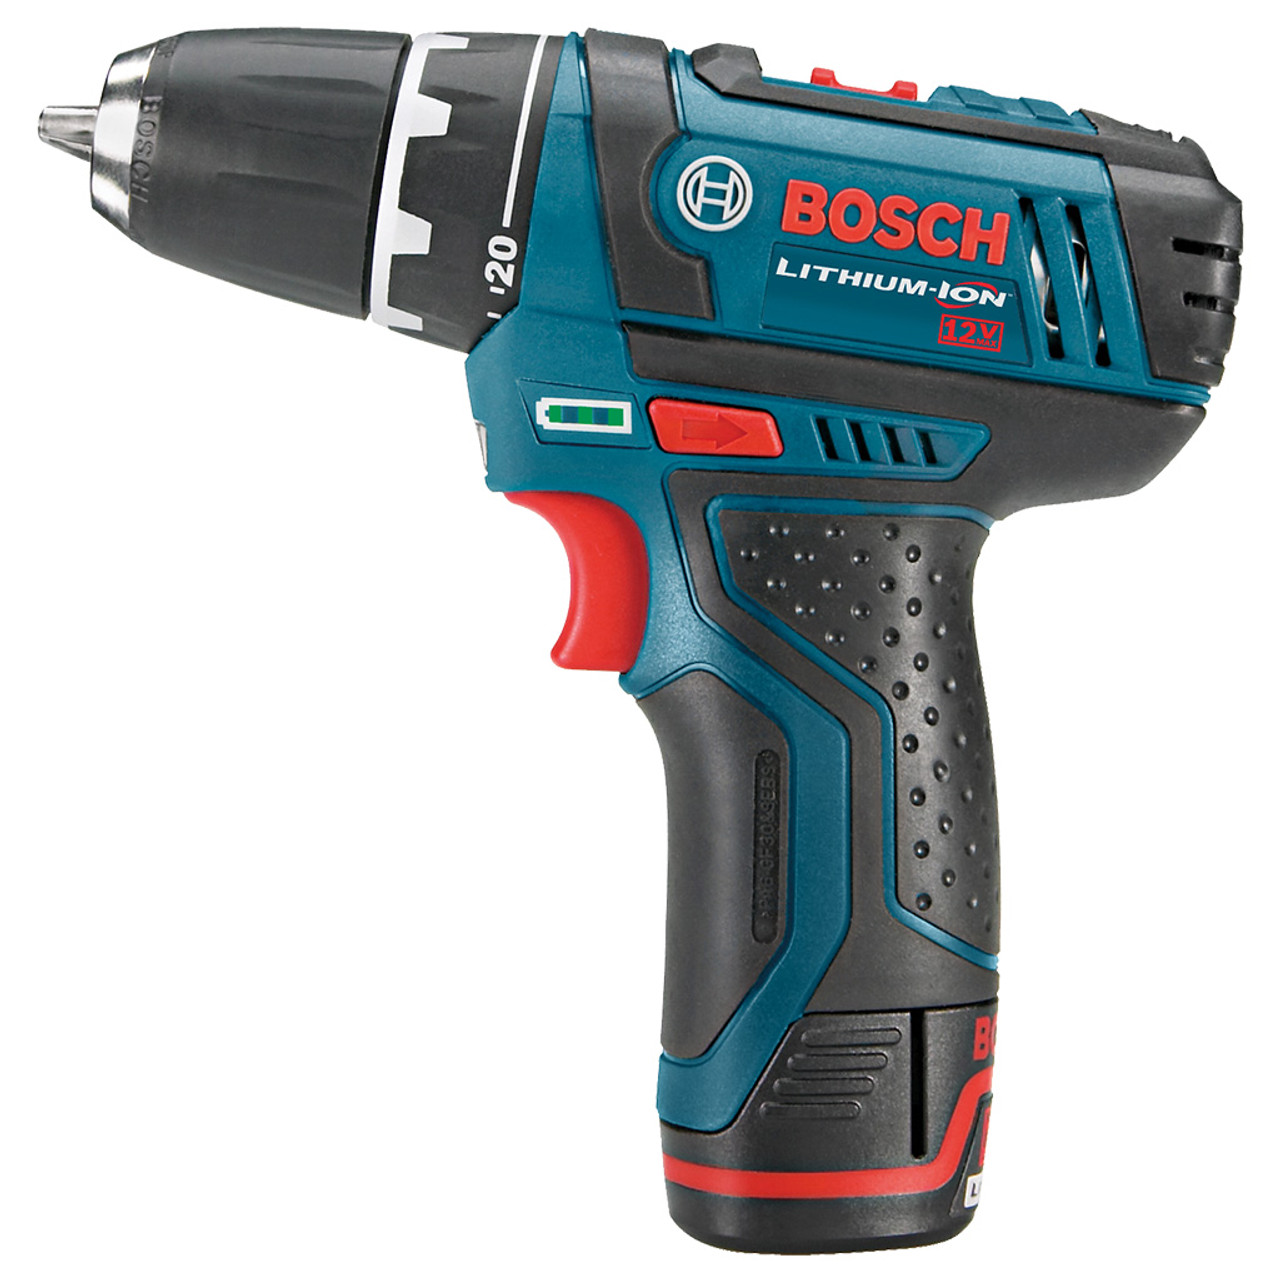 Bosch Max Lithium Cordless Drill Midwest Technology